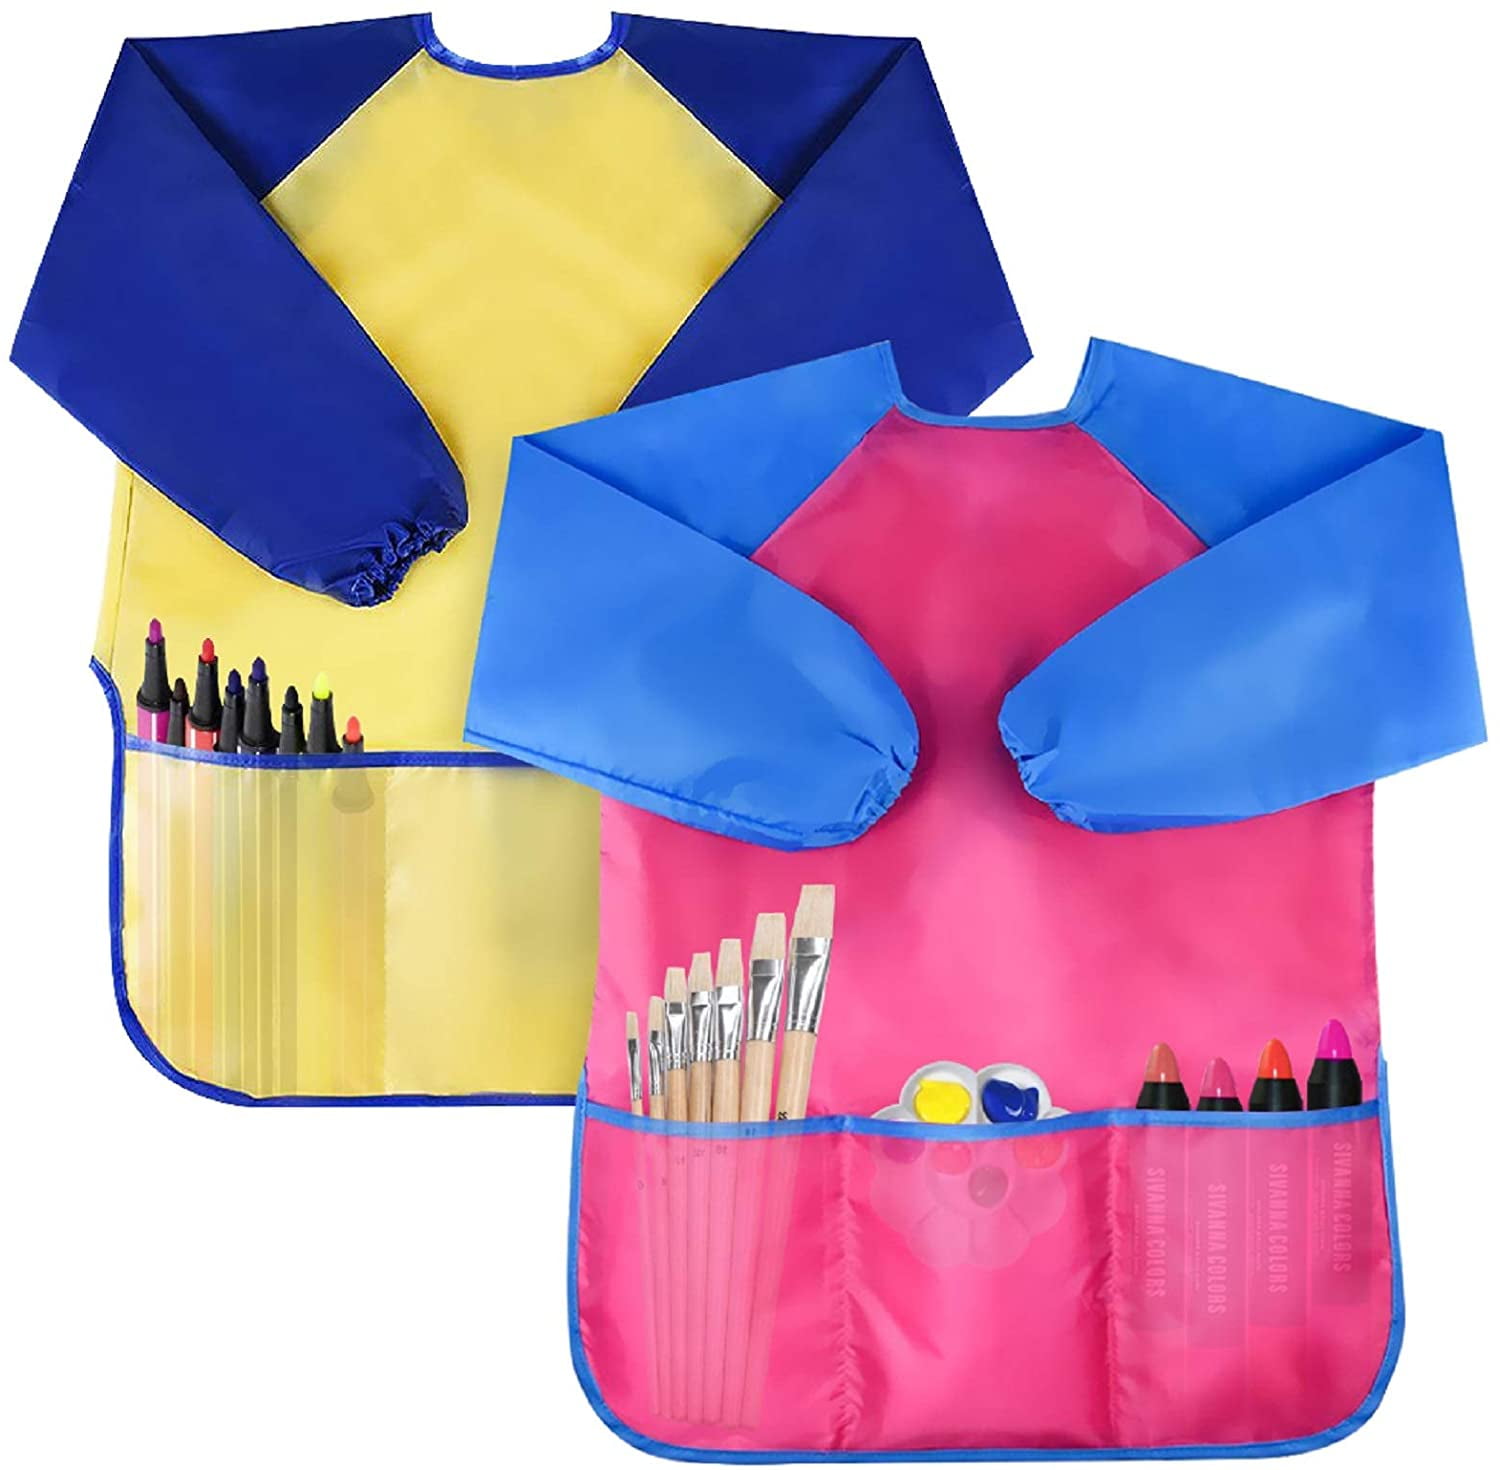 Waterproof Artist Painting Aprons Sleeveless Children Art Smocks with Pockets for Age 2-7 Years Kids Art Smock